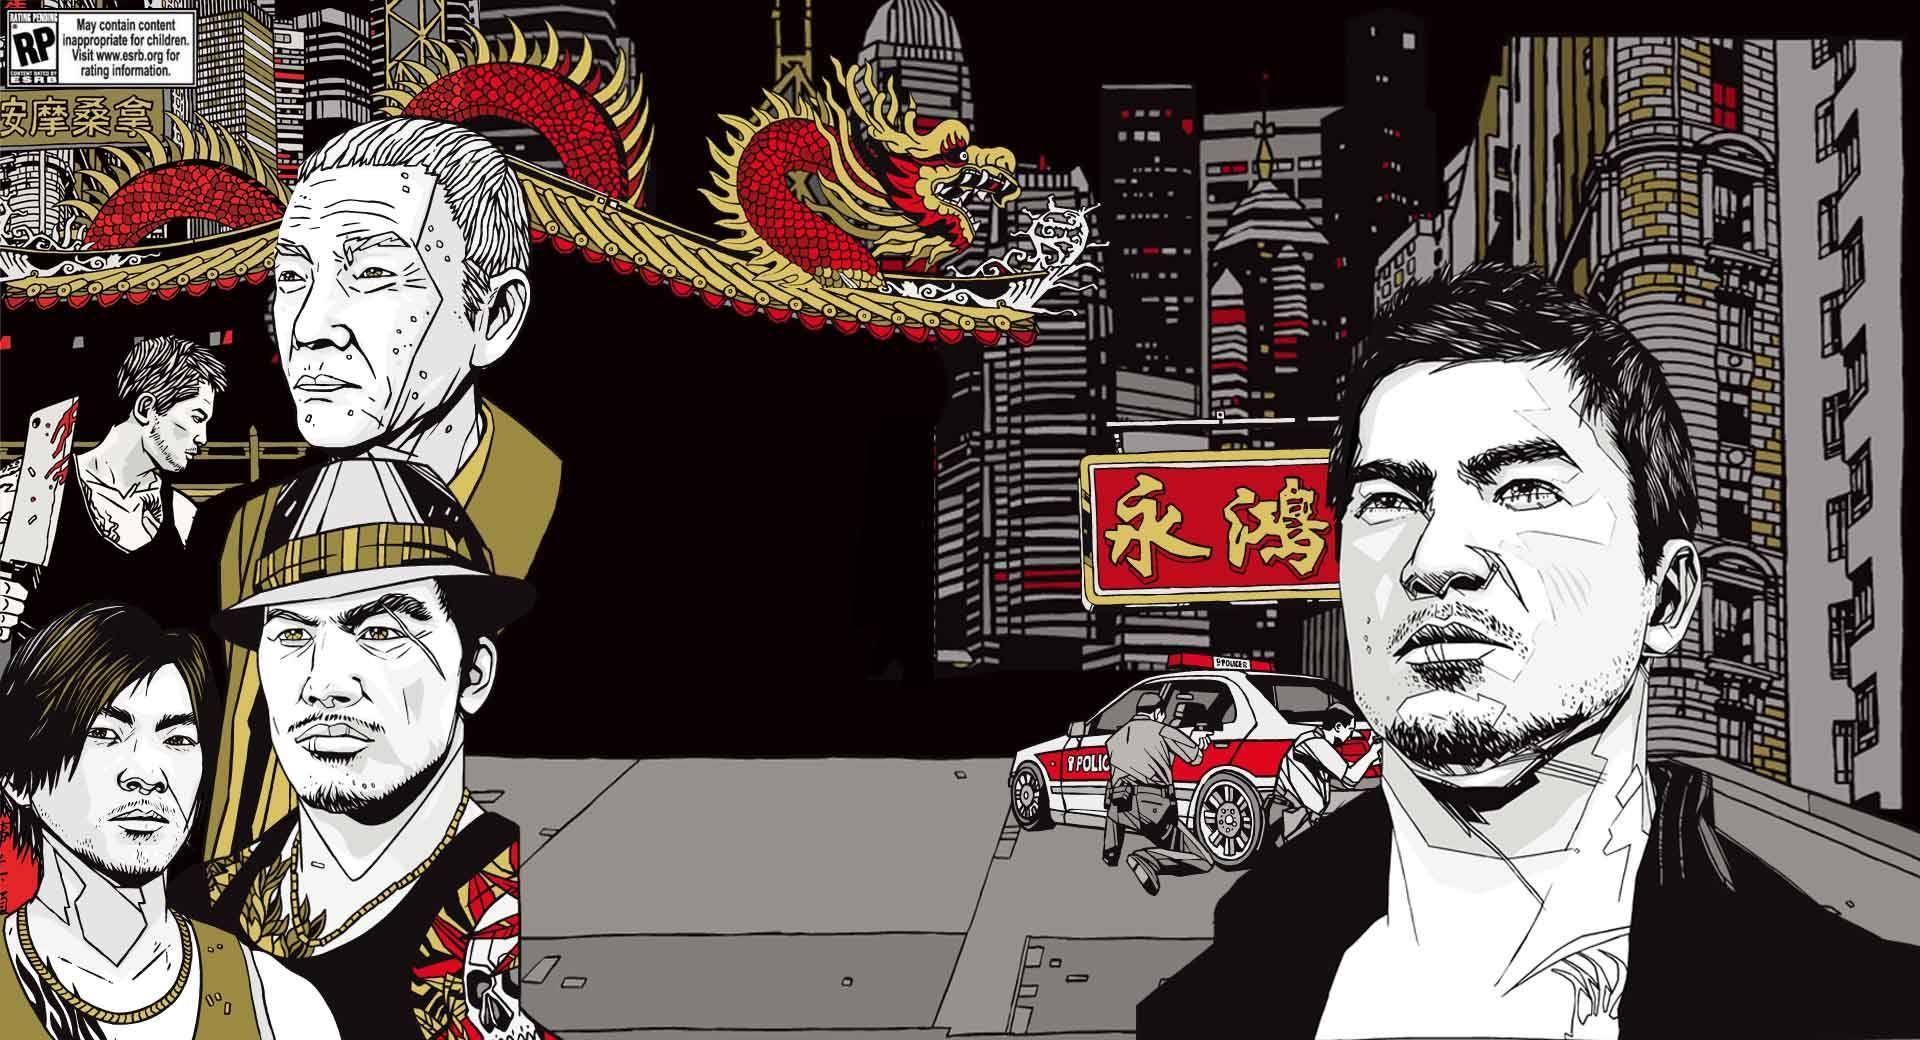 Sleeping Dogs Wallpaper in HD « GamingBolt.com: Video Game News